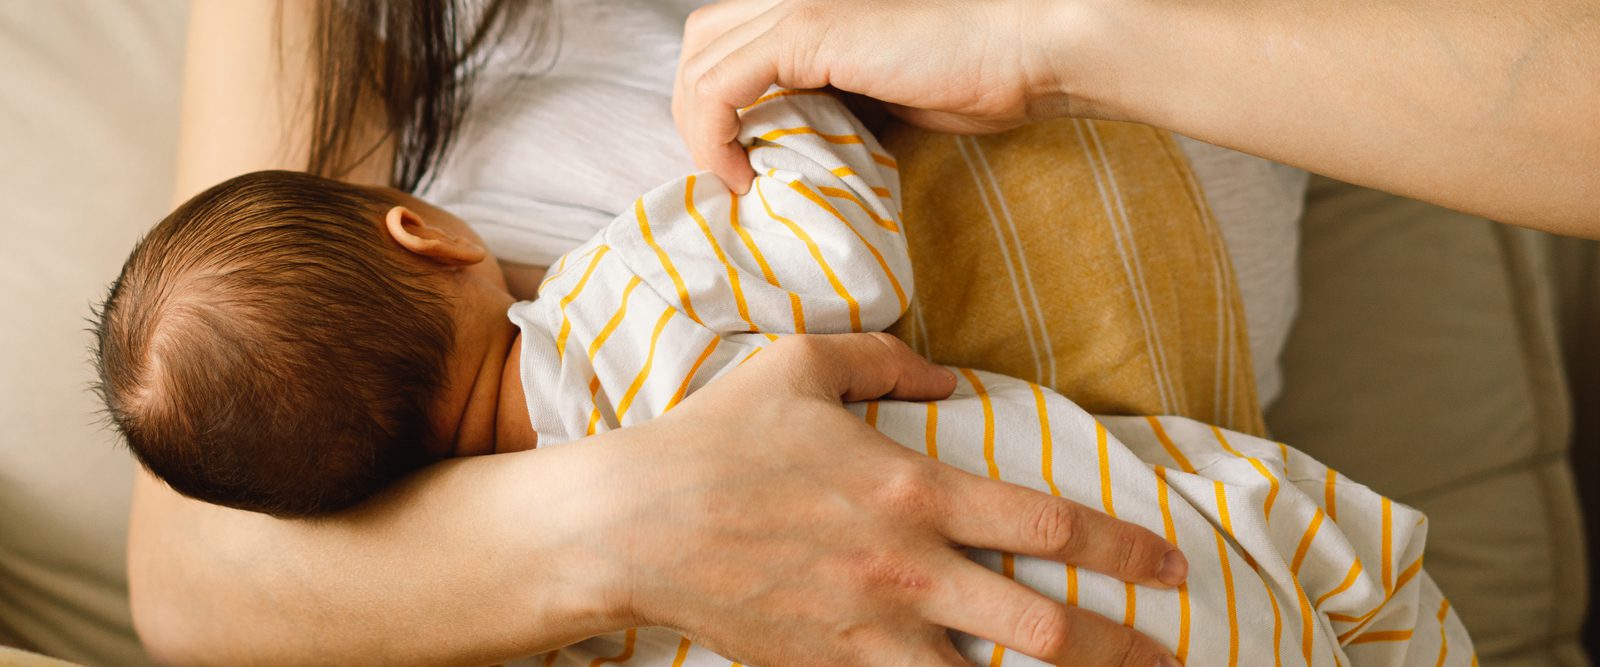 5 Benefits of Breastfeeding for You and Your Baby